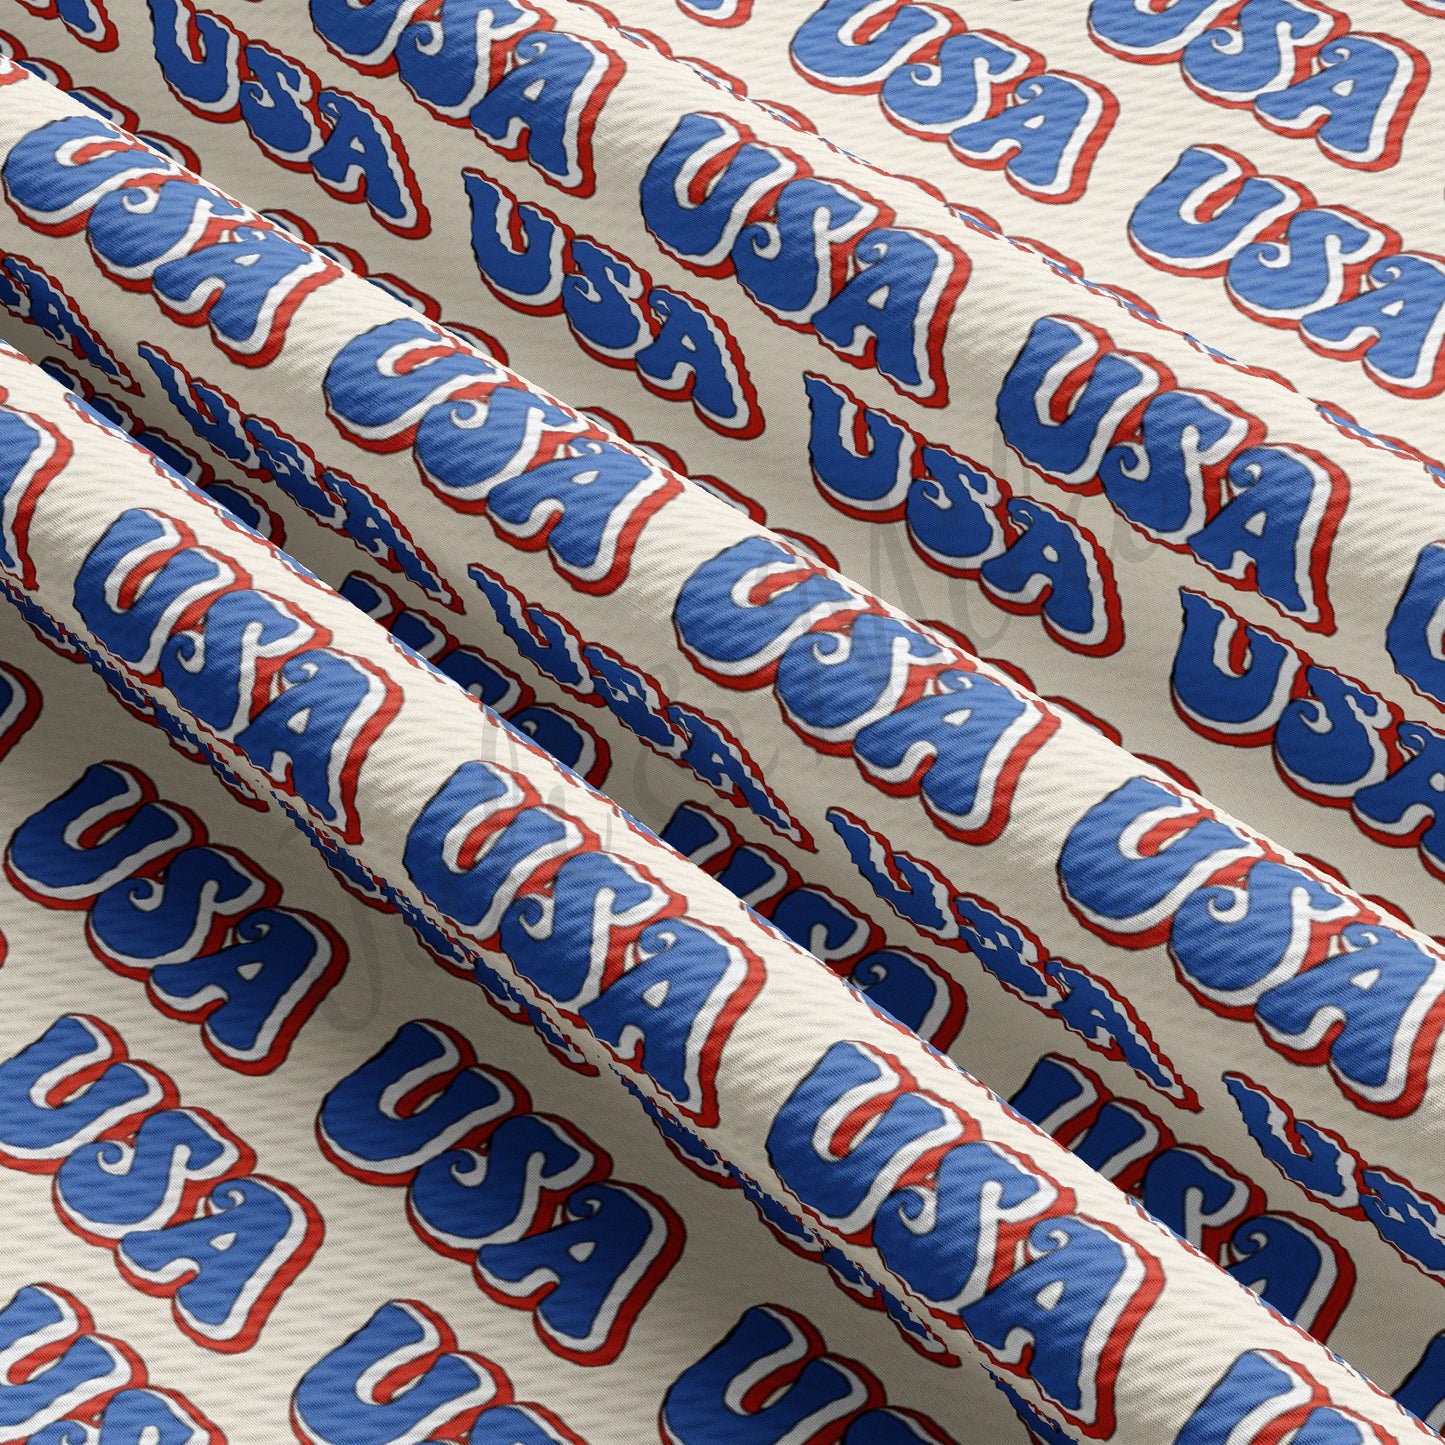 Patriotic 4th of July Bullet Fabric AA367